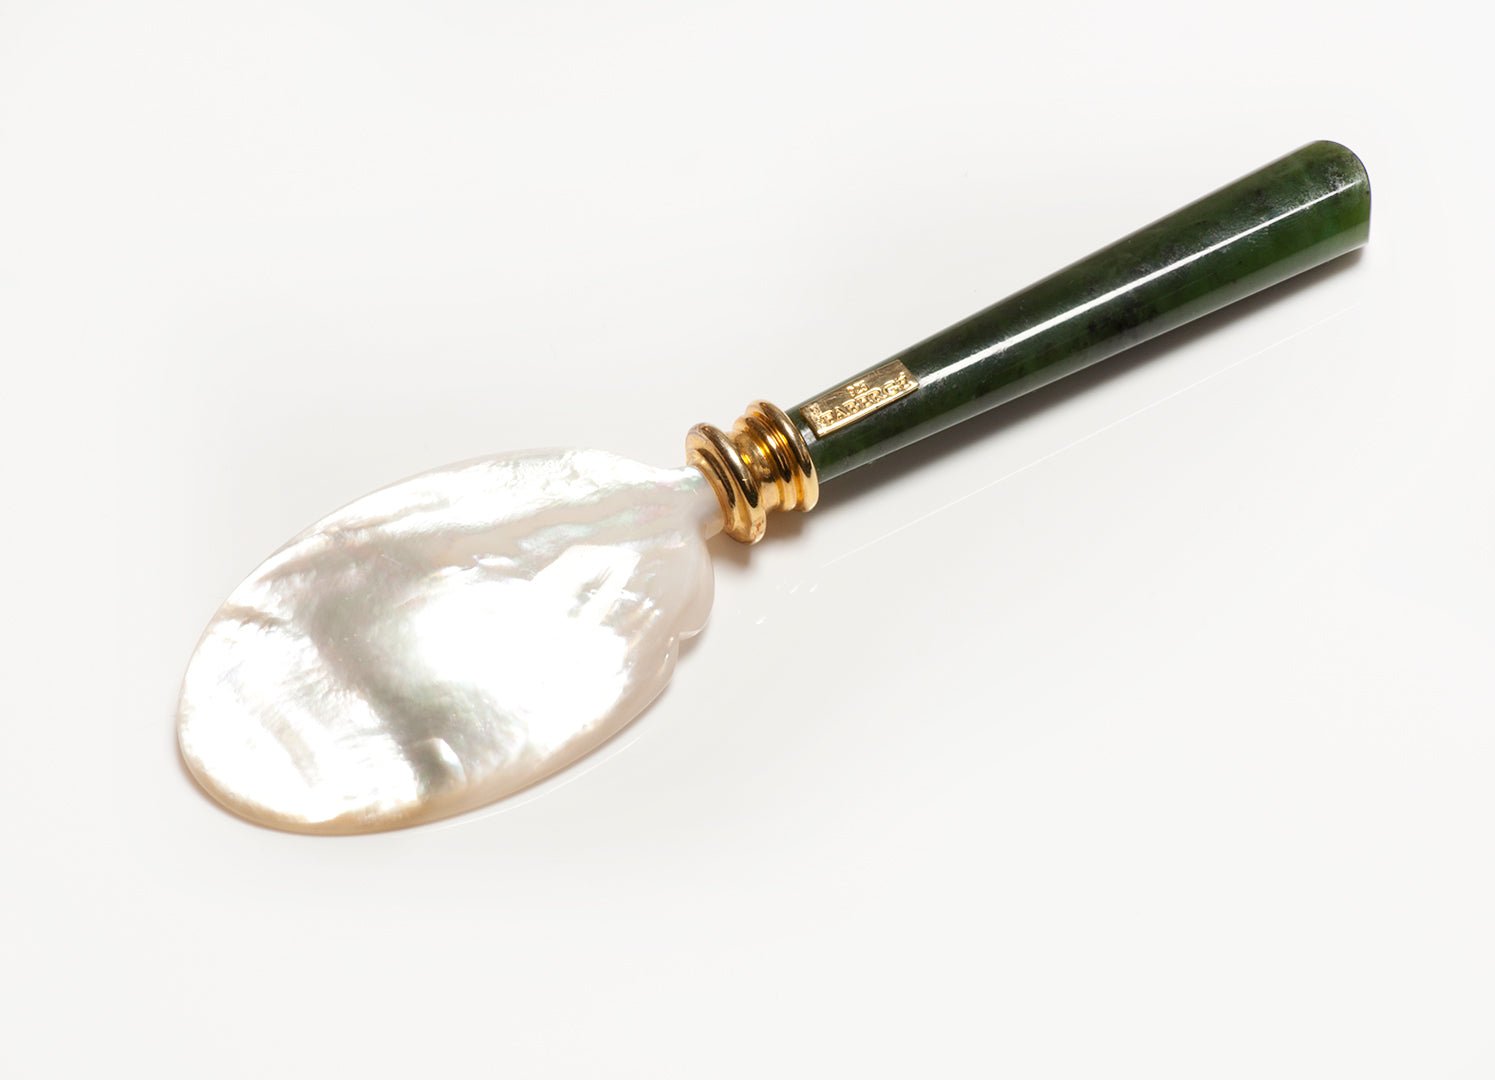 Faberge Jade Oyster Shell Caviar Spoon